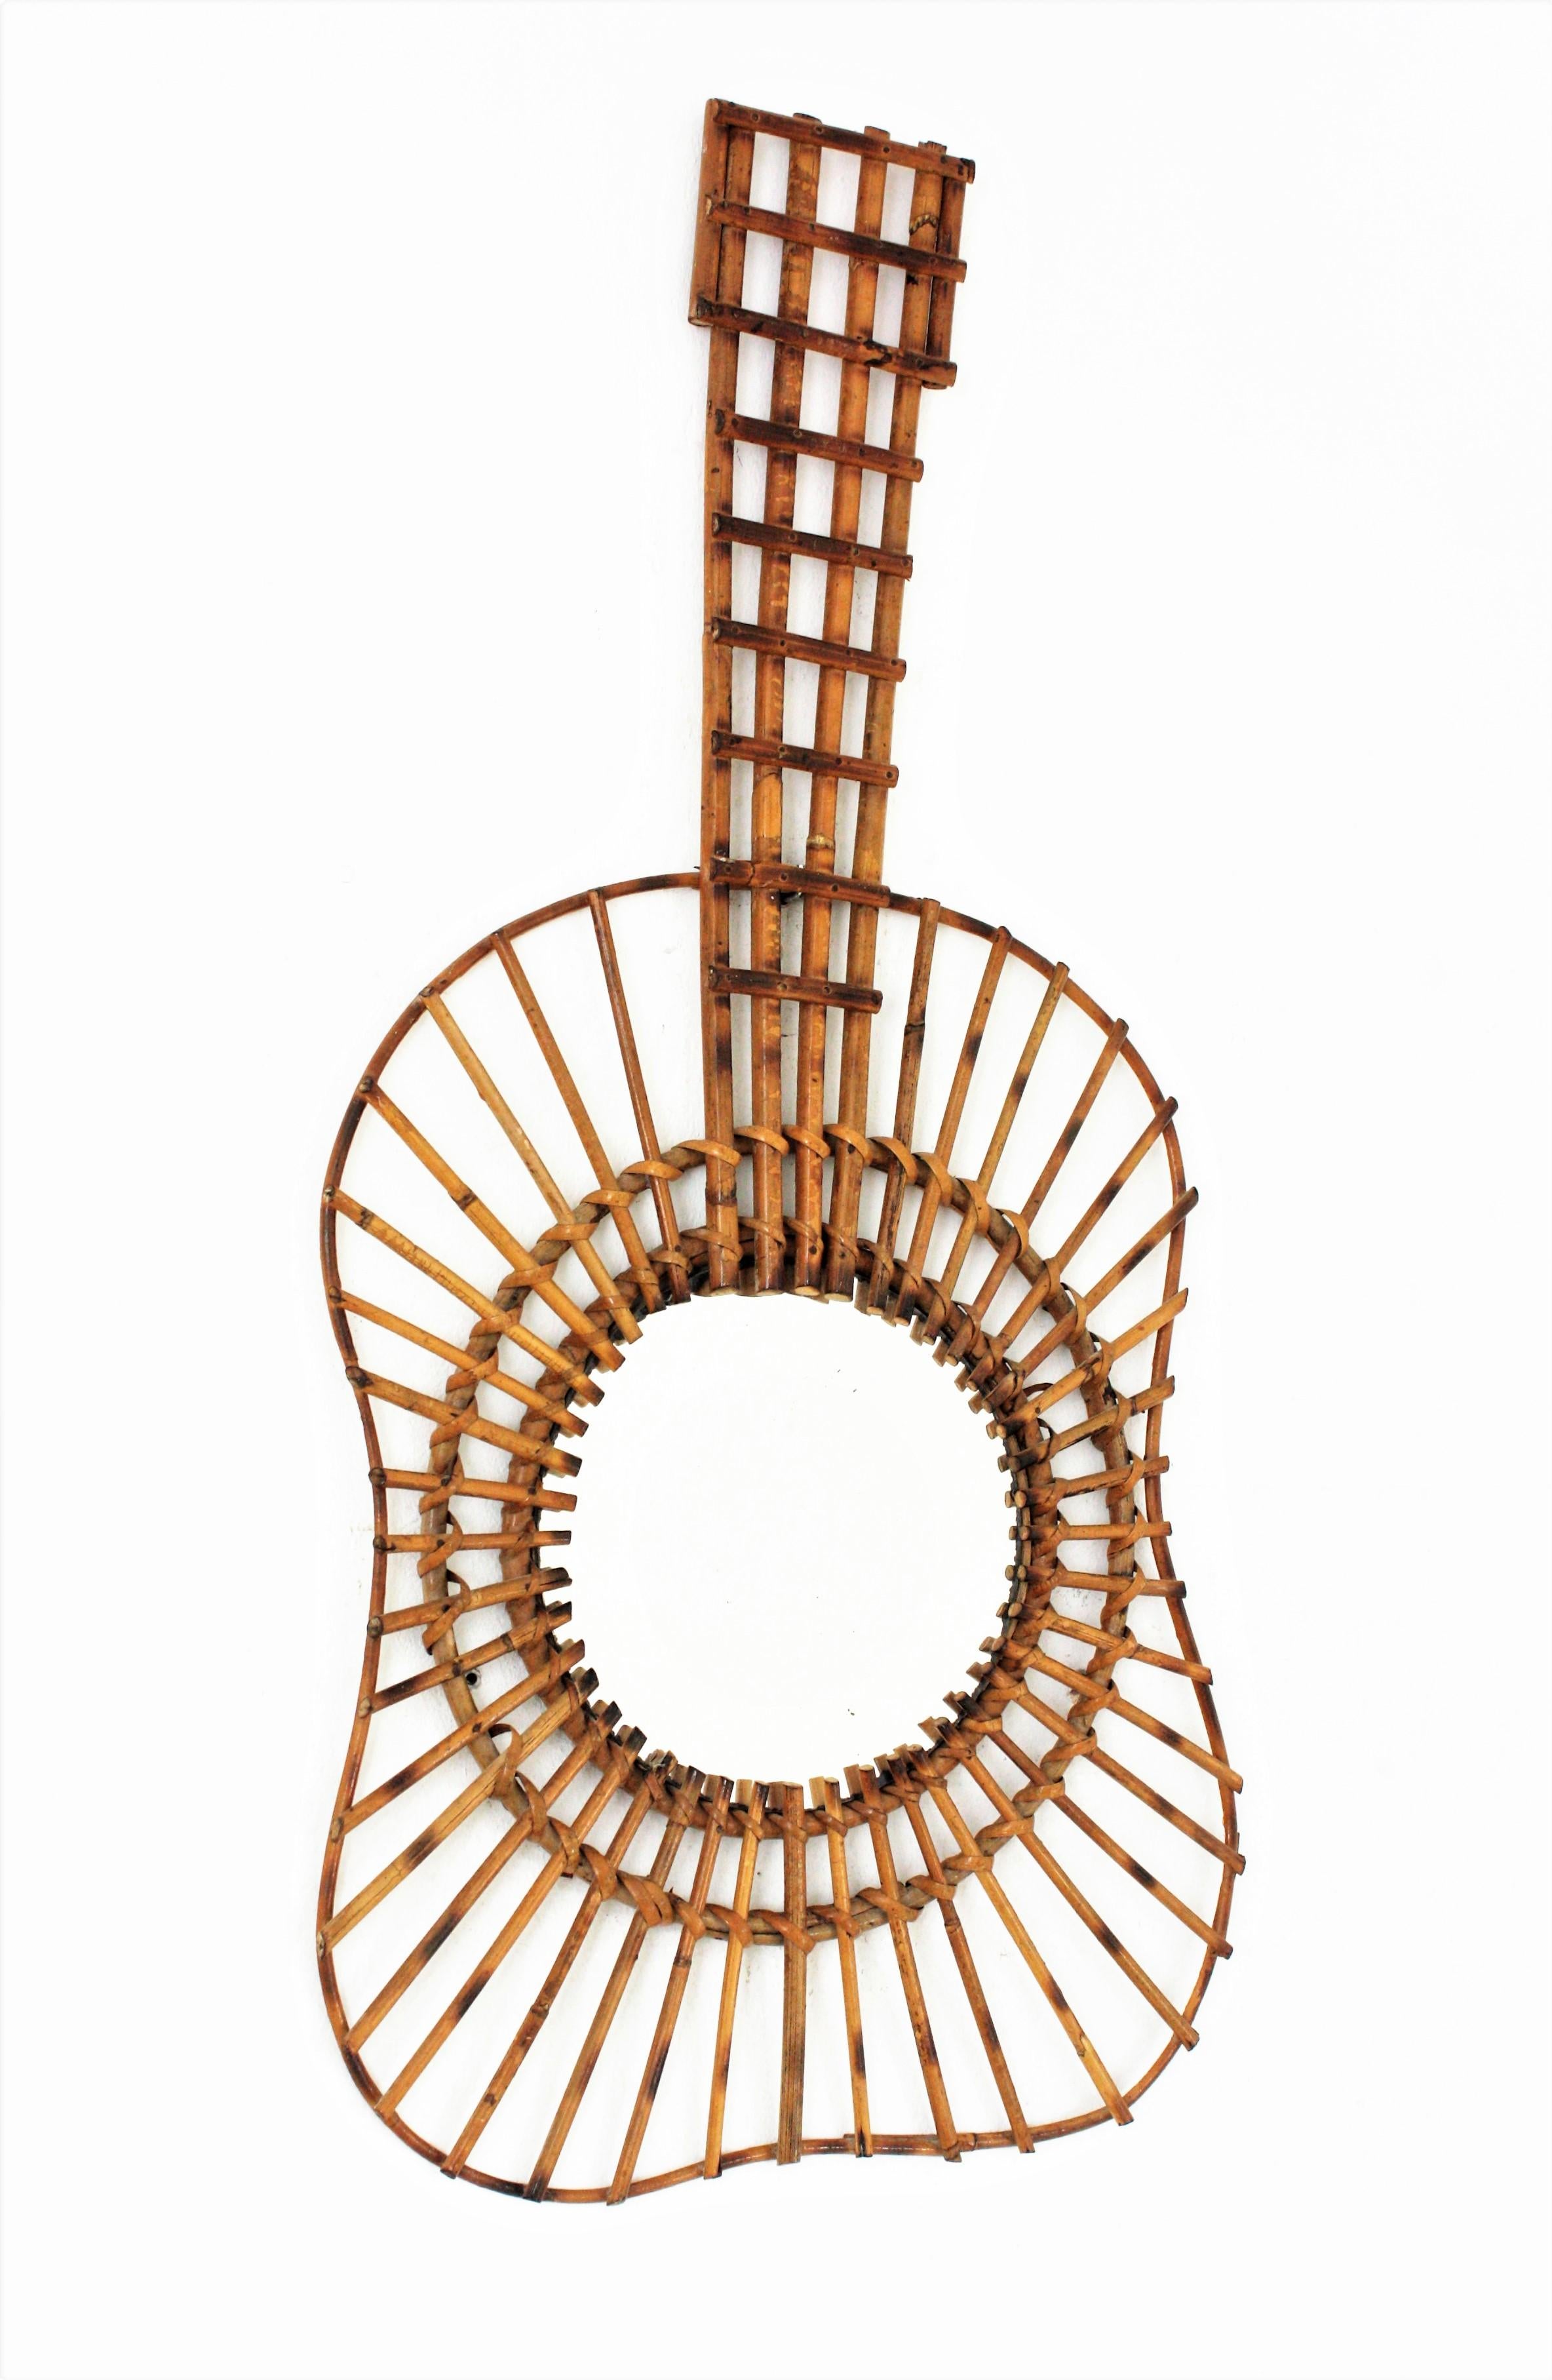 Unusual handcrafted rattan guitar wall mirror, France, 1950s.
This spectacular mirror has a design combining the Midcentury style and the natural taste from the French Riviera.
Excellent vintage condition.
Eye-catching placed alone but gorgeous